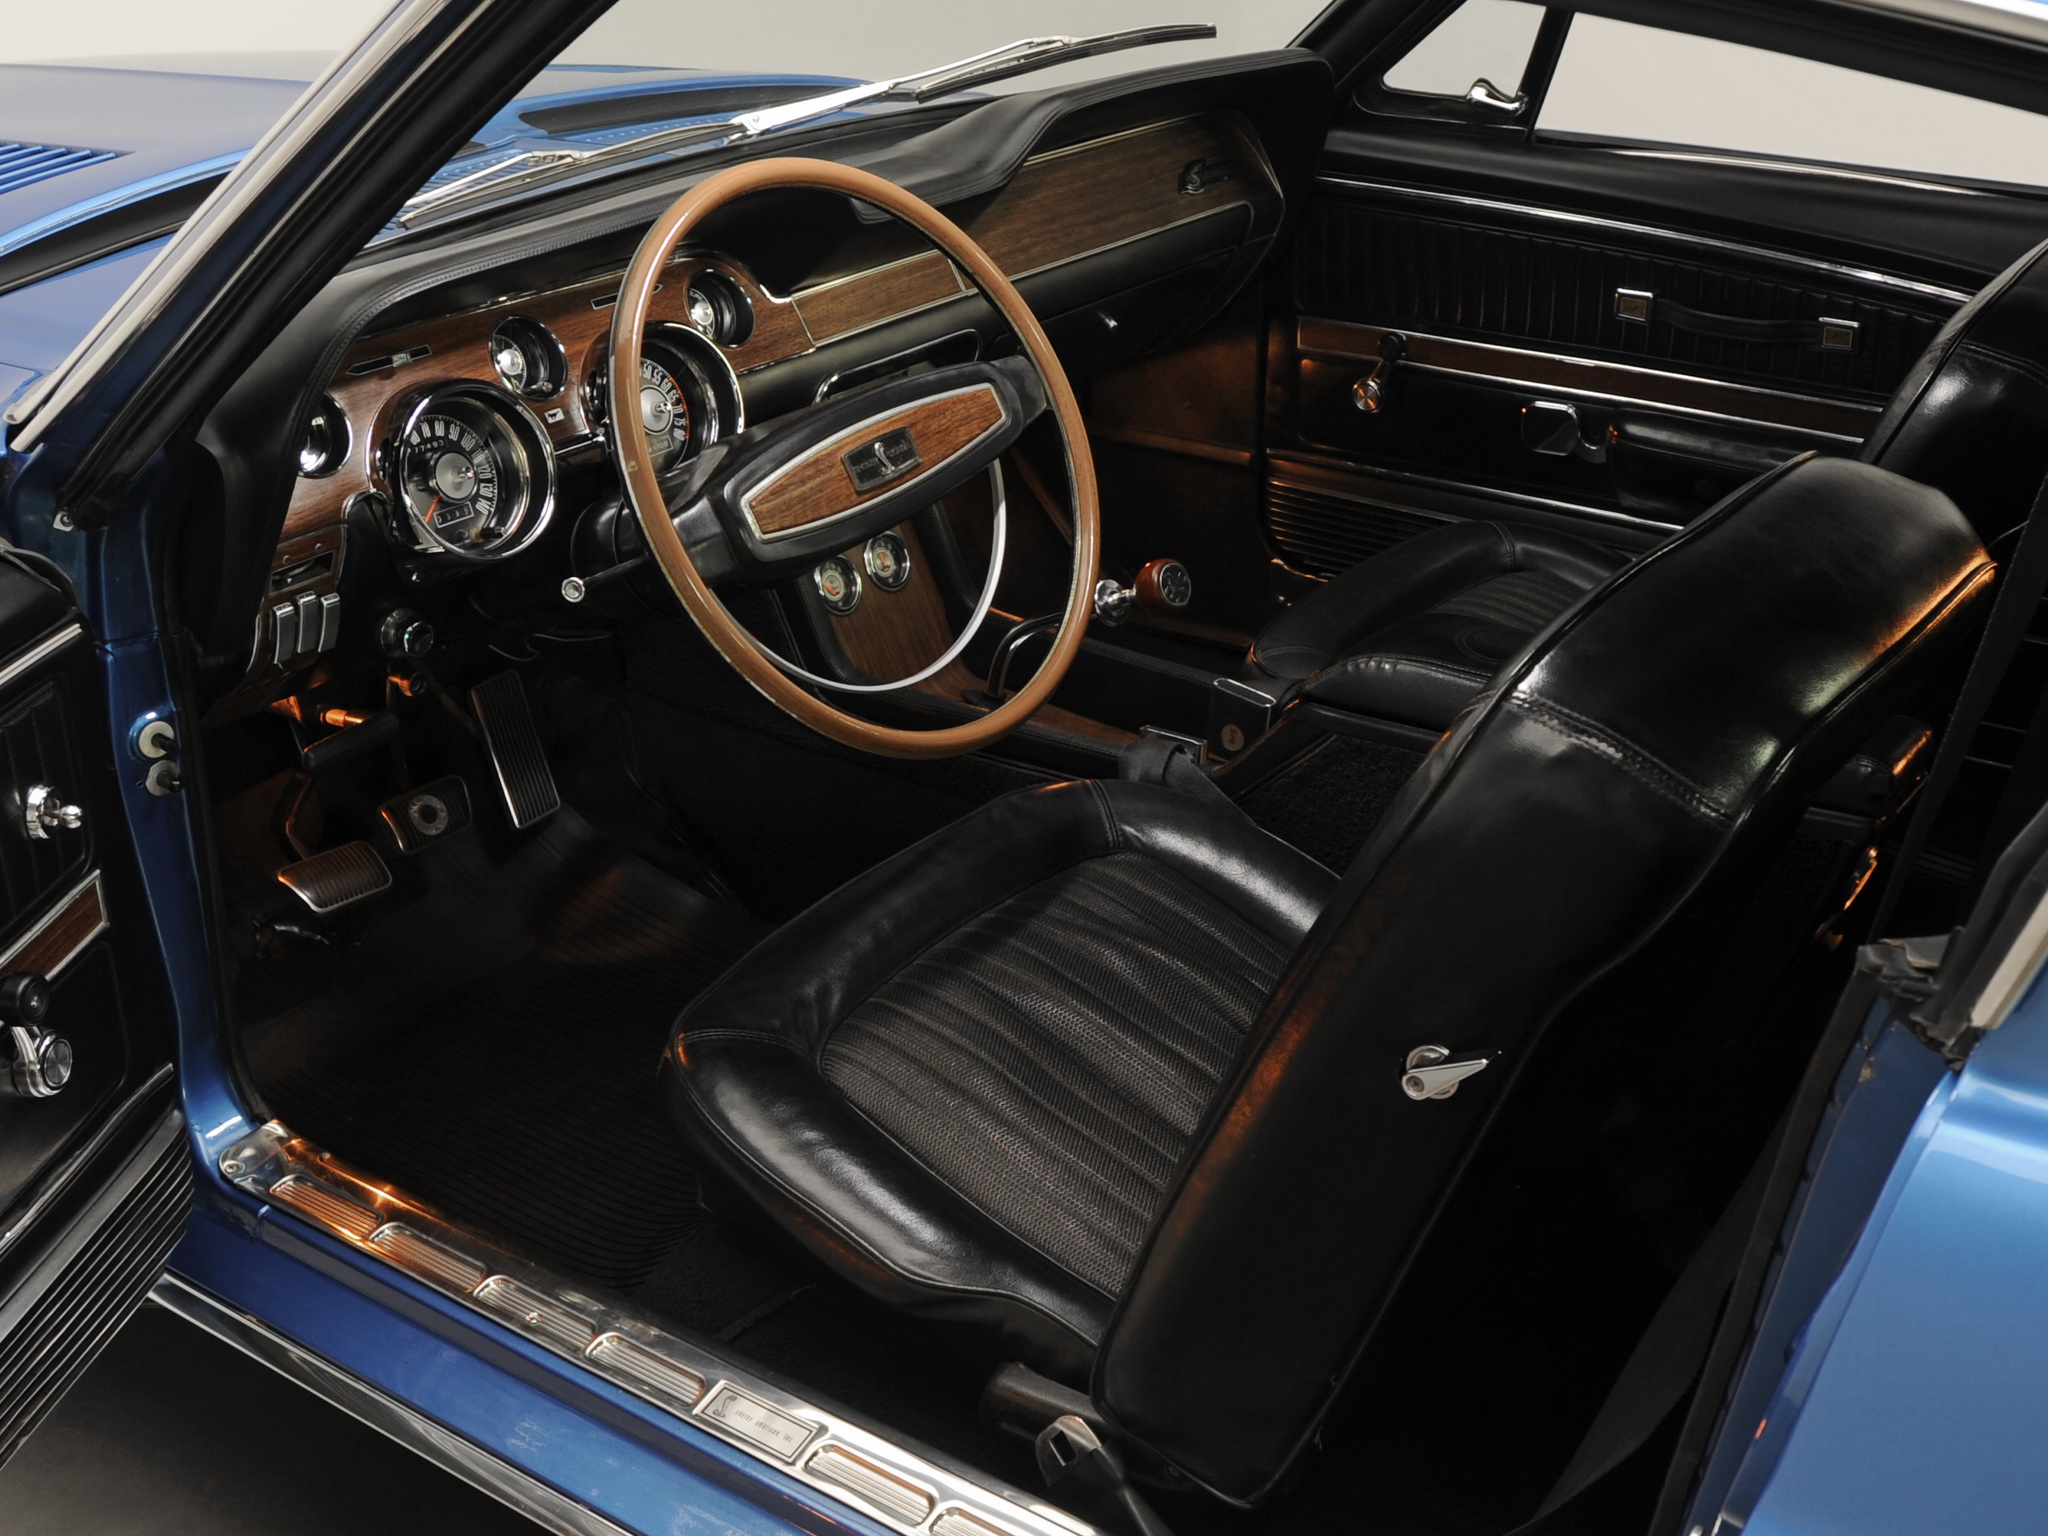 1968, Shelby, Gt350, Ford, Mustang, Classic, Muscle, Interior Wallpaper